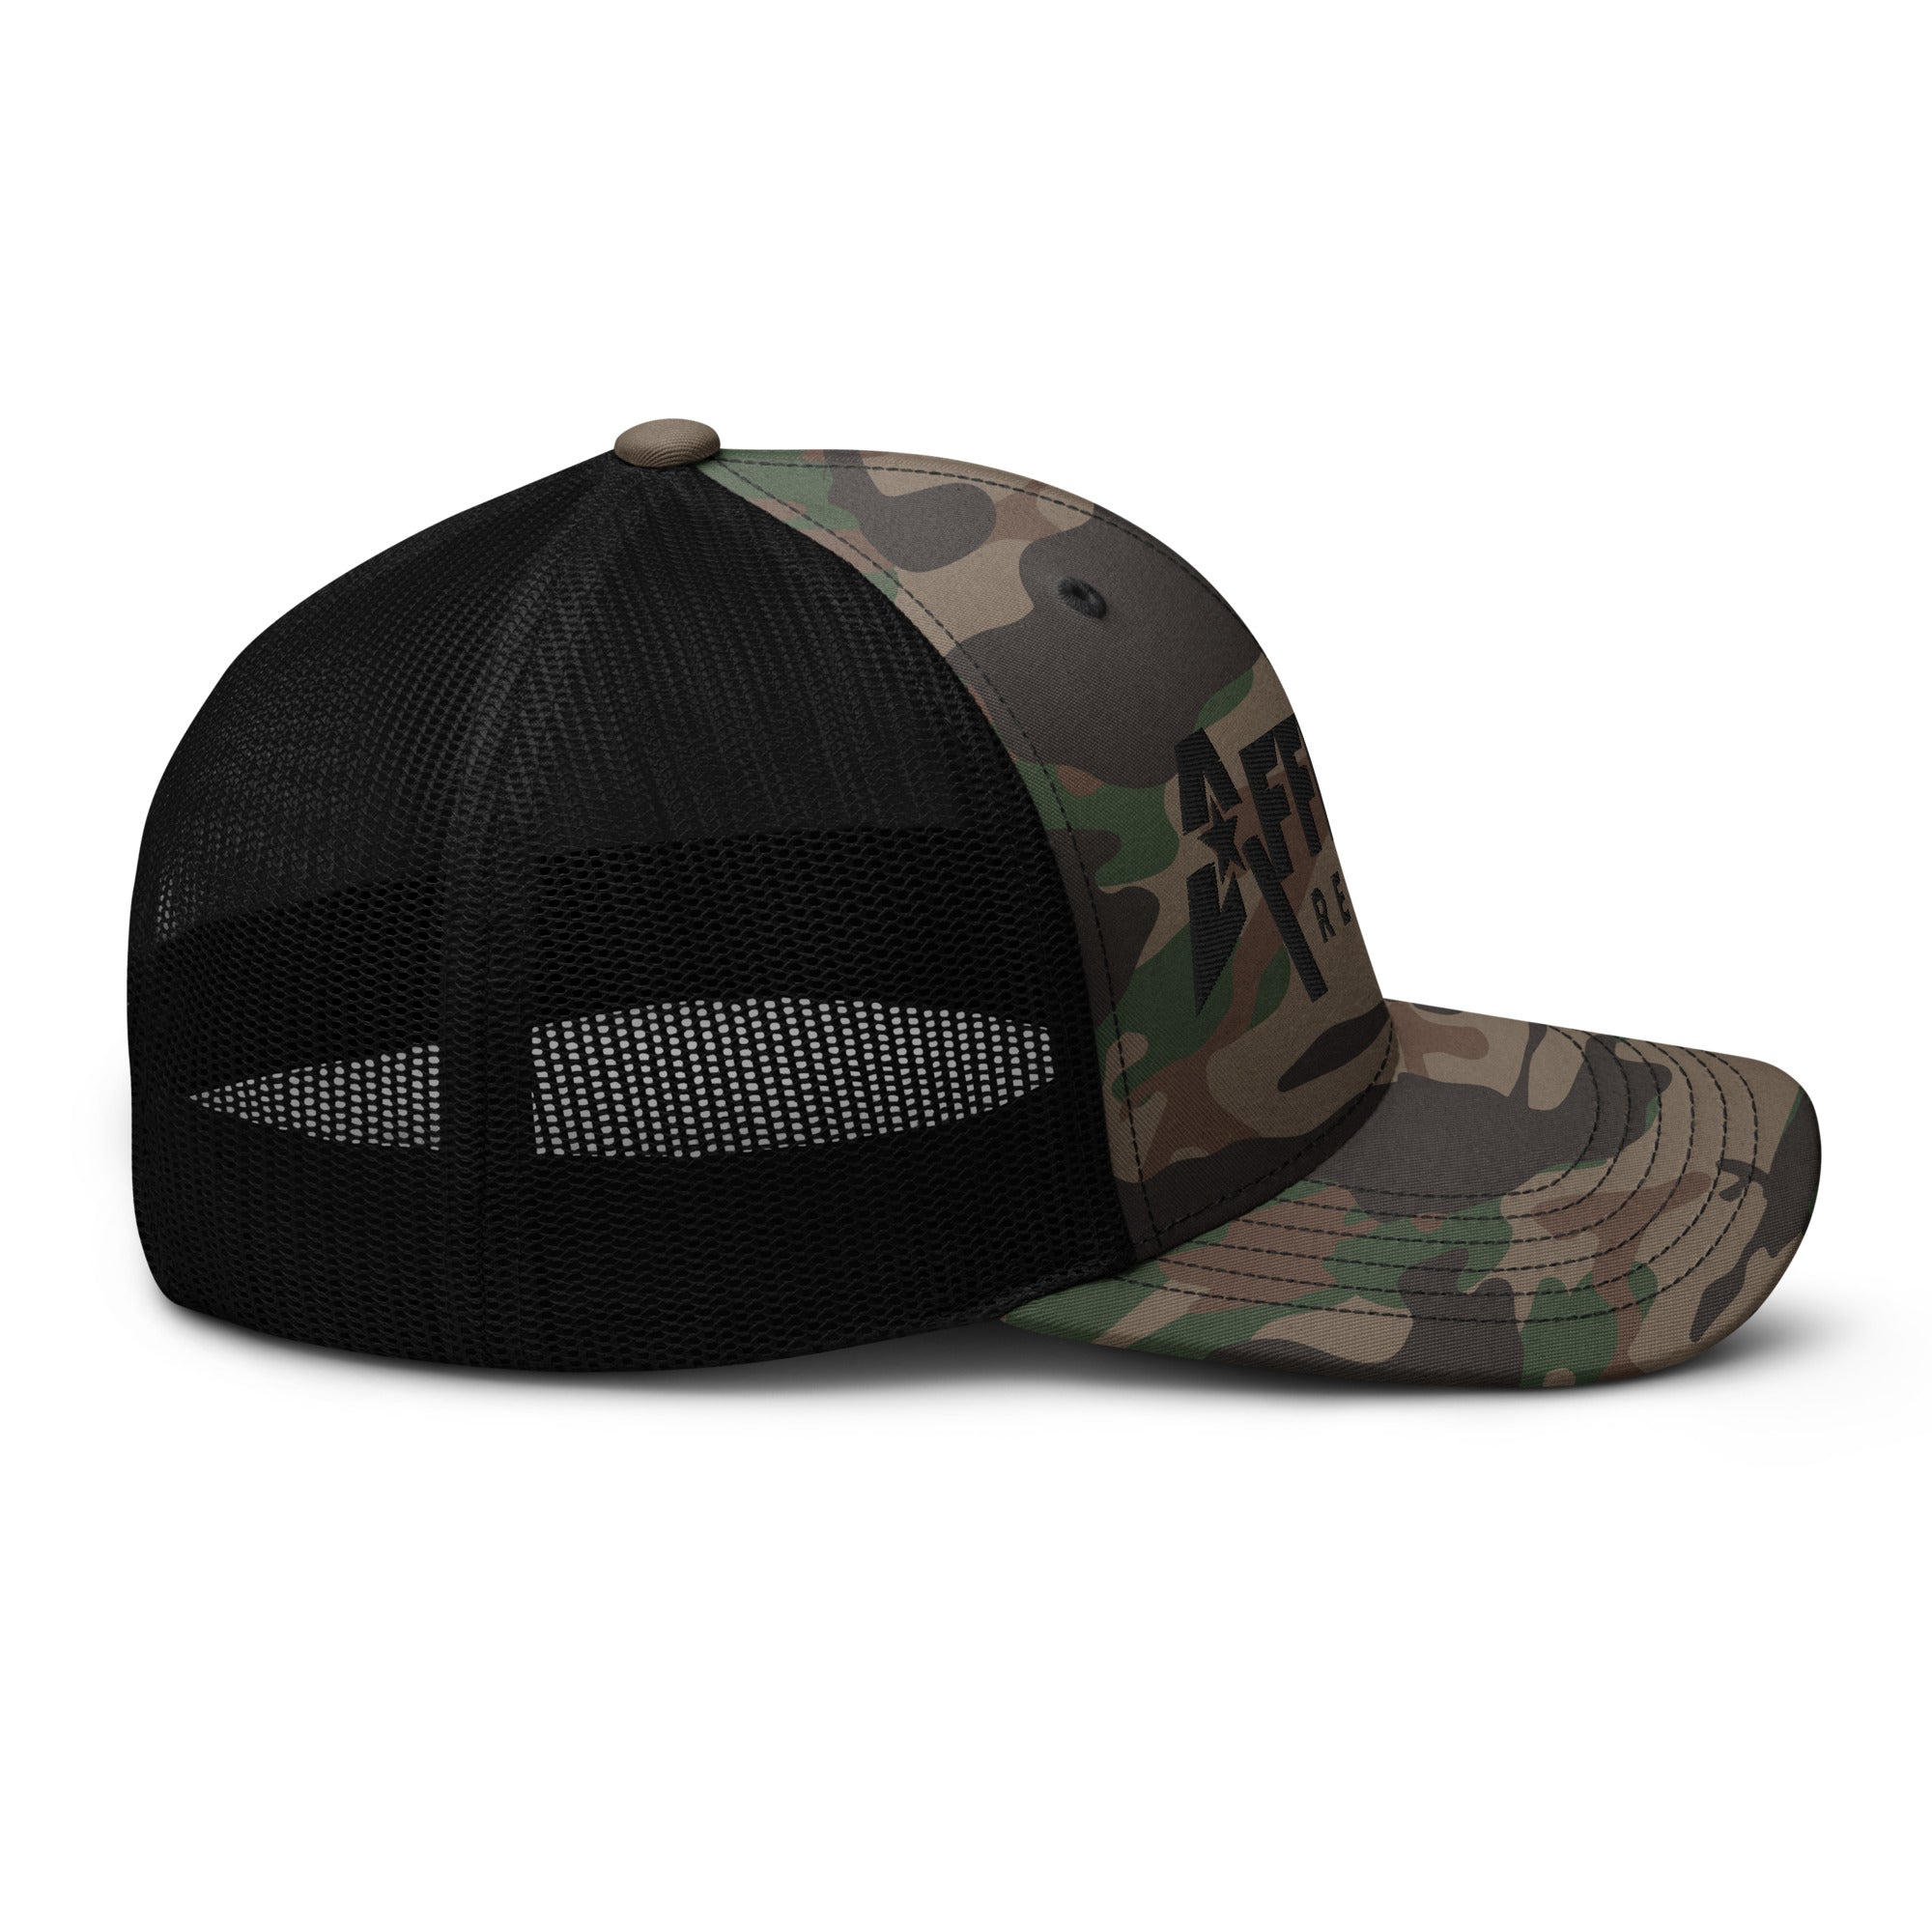 AFFIANT RECORDS - CAMOUFLAGE TRUCKER HAT